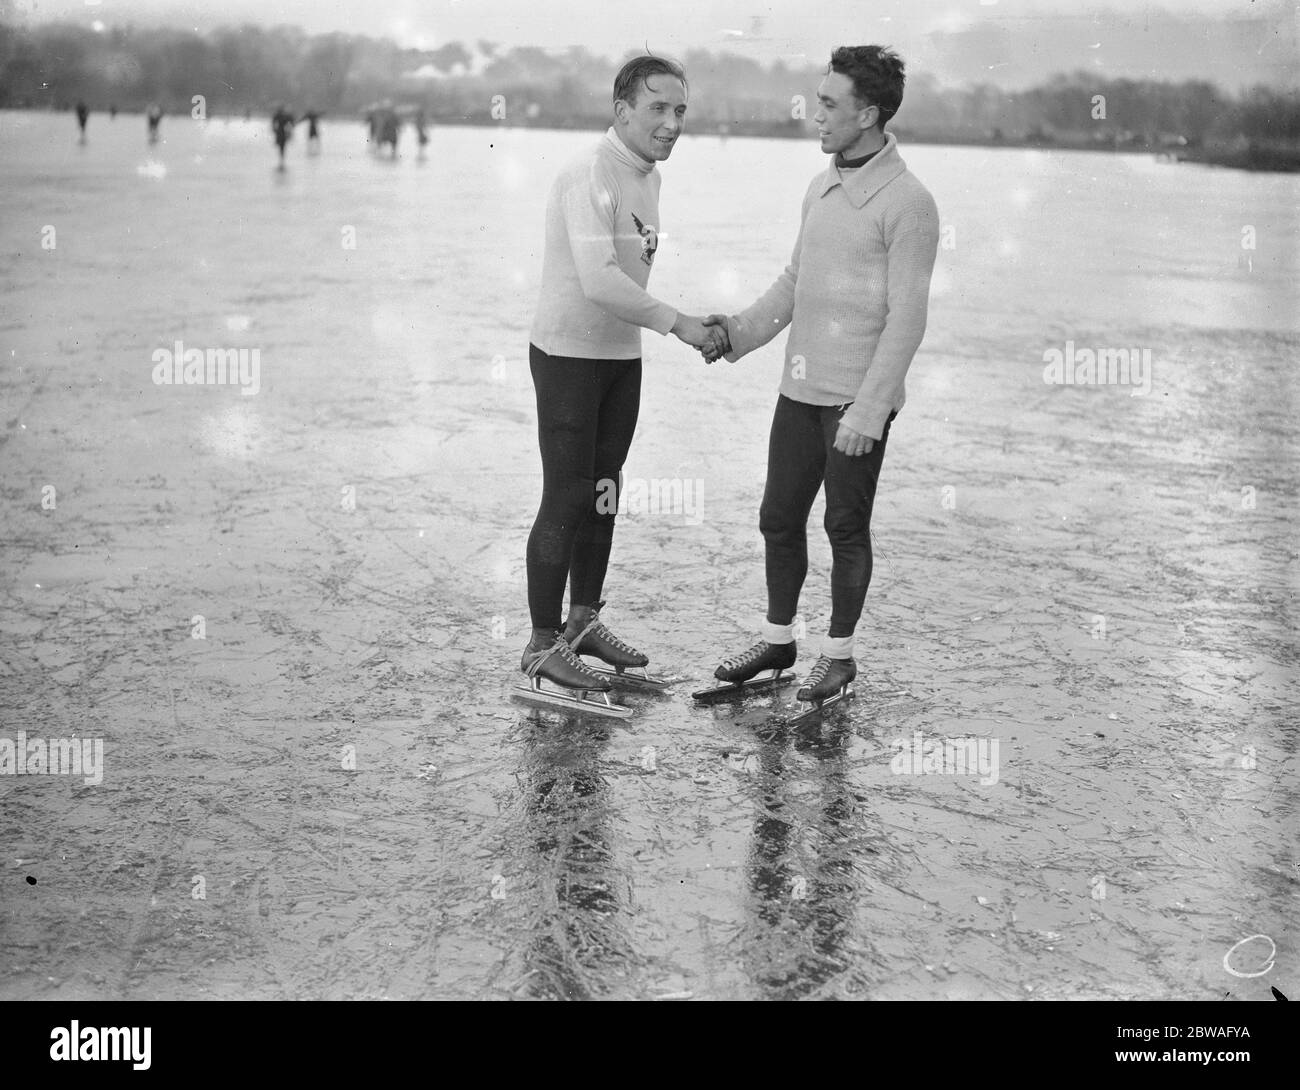 Skating Championships at Bury Lake Rickmansworth Robert Wyman ( left ) , winner of the quarter mile Championship and also broke the record , being congratulated by S W Spry , who finished second 15 December 1933 Stock Photo